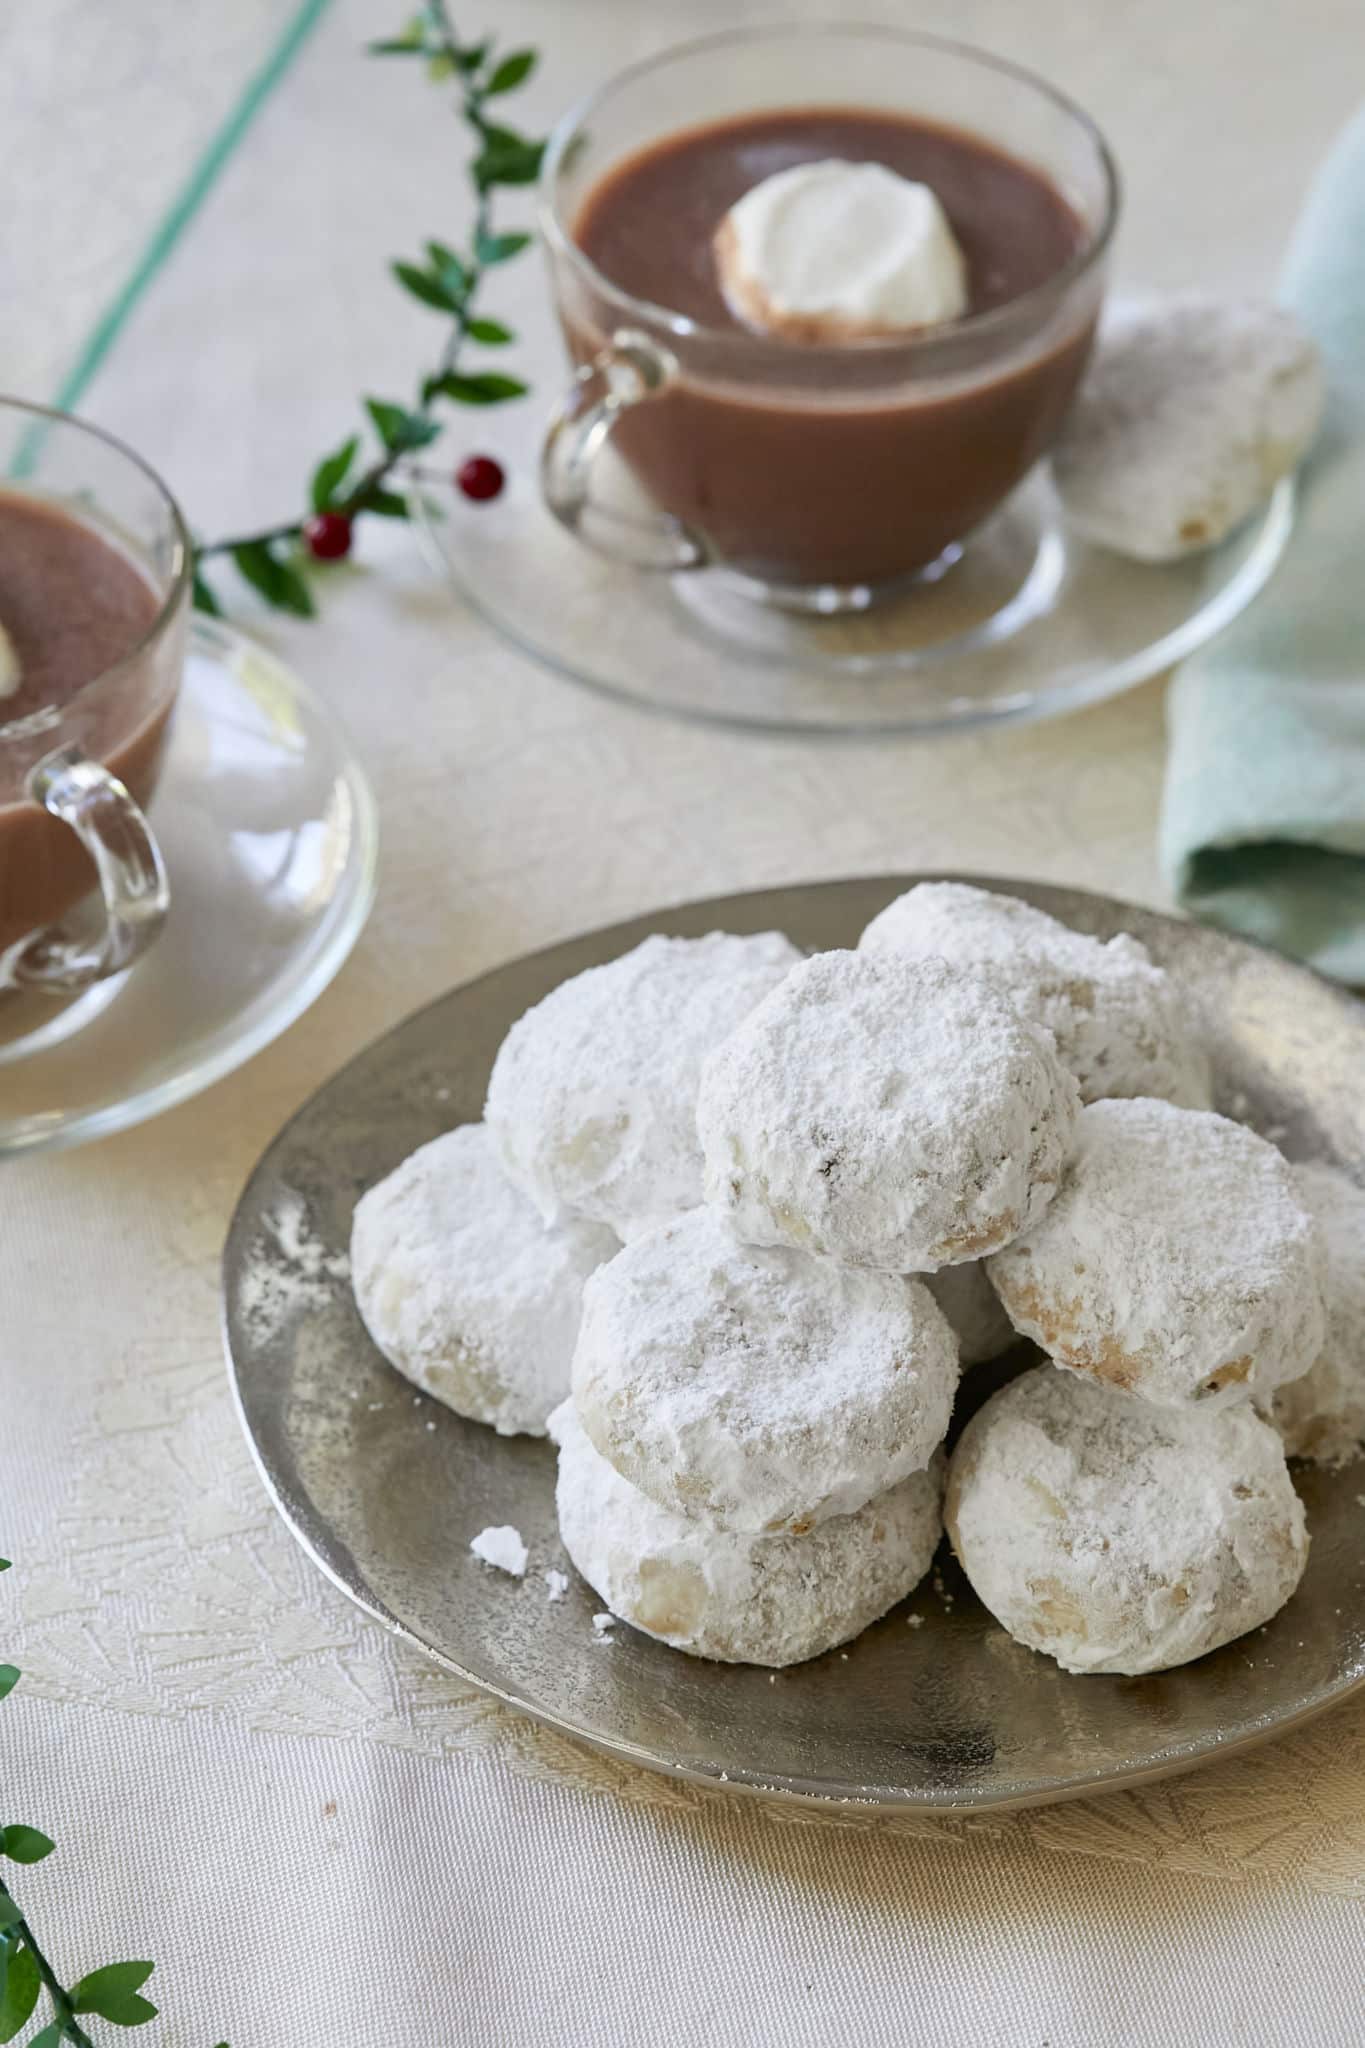 Kourabiedes, coated in powdered sugar, are served on a silver plate on top of a table decorated with holly berries. Next to the Christmas cookies are two mugs of hot chocolate. 